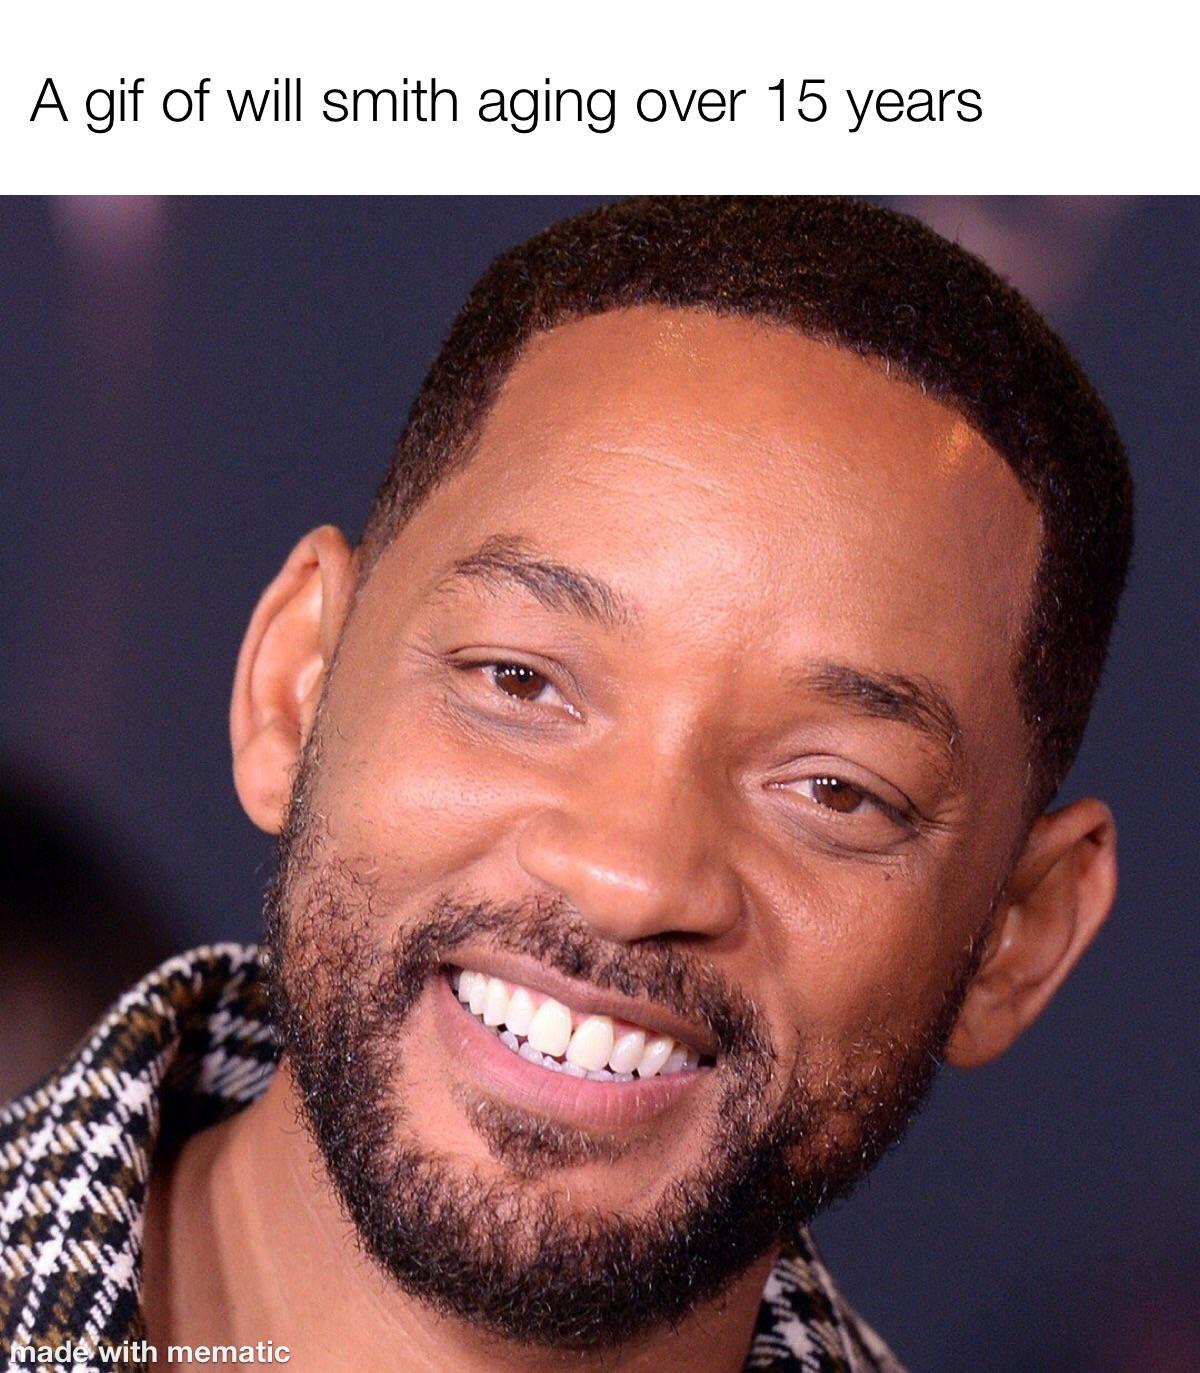 will smith - A gif of will smith aging over 15 years made with mematic